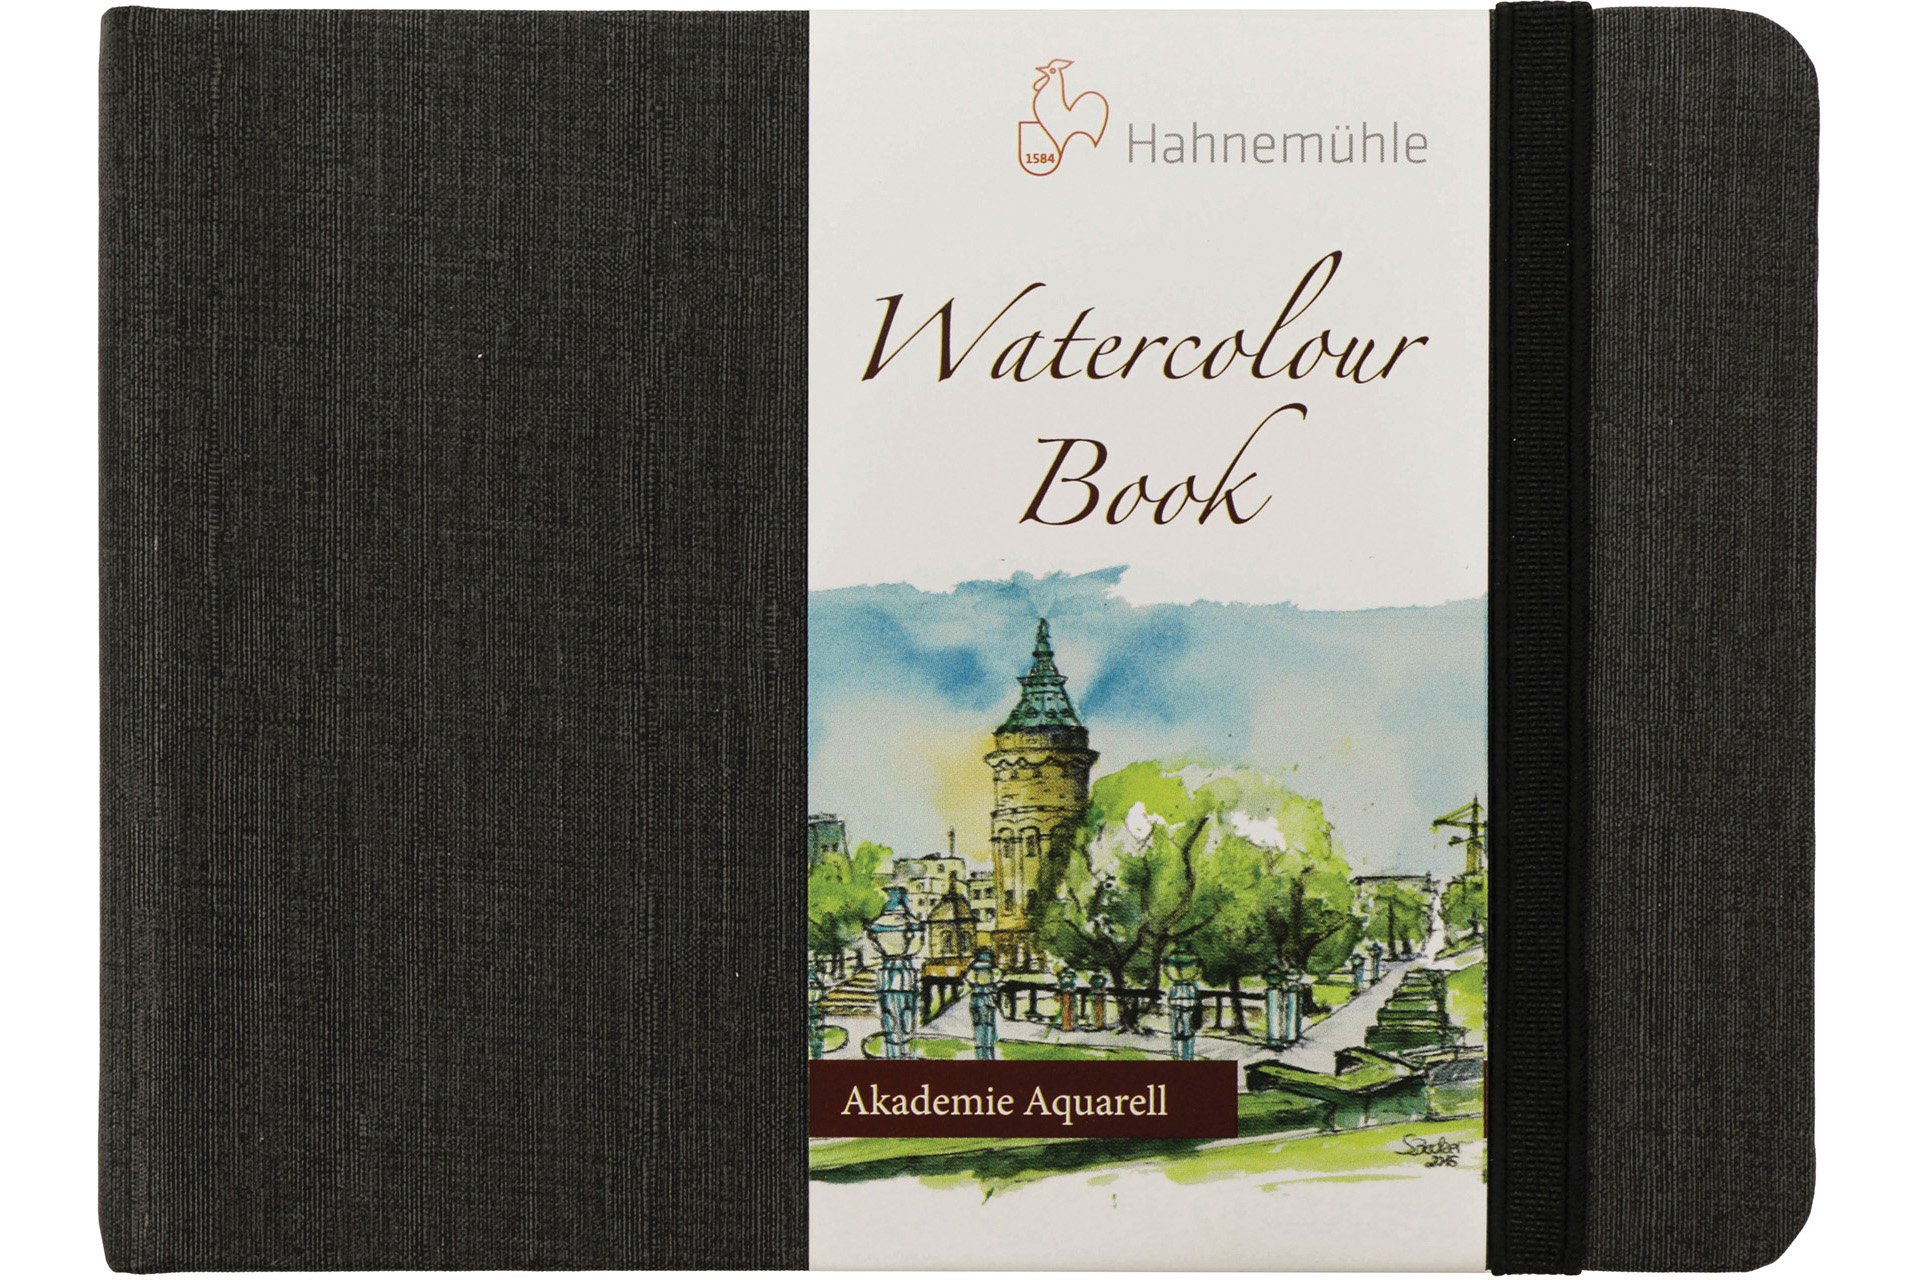 A6 (portrait) Watercolour Book by Hahnemuhle